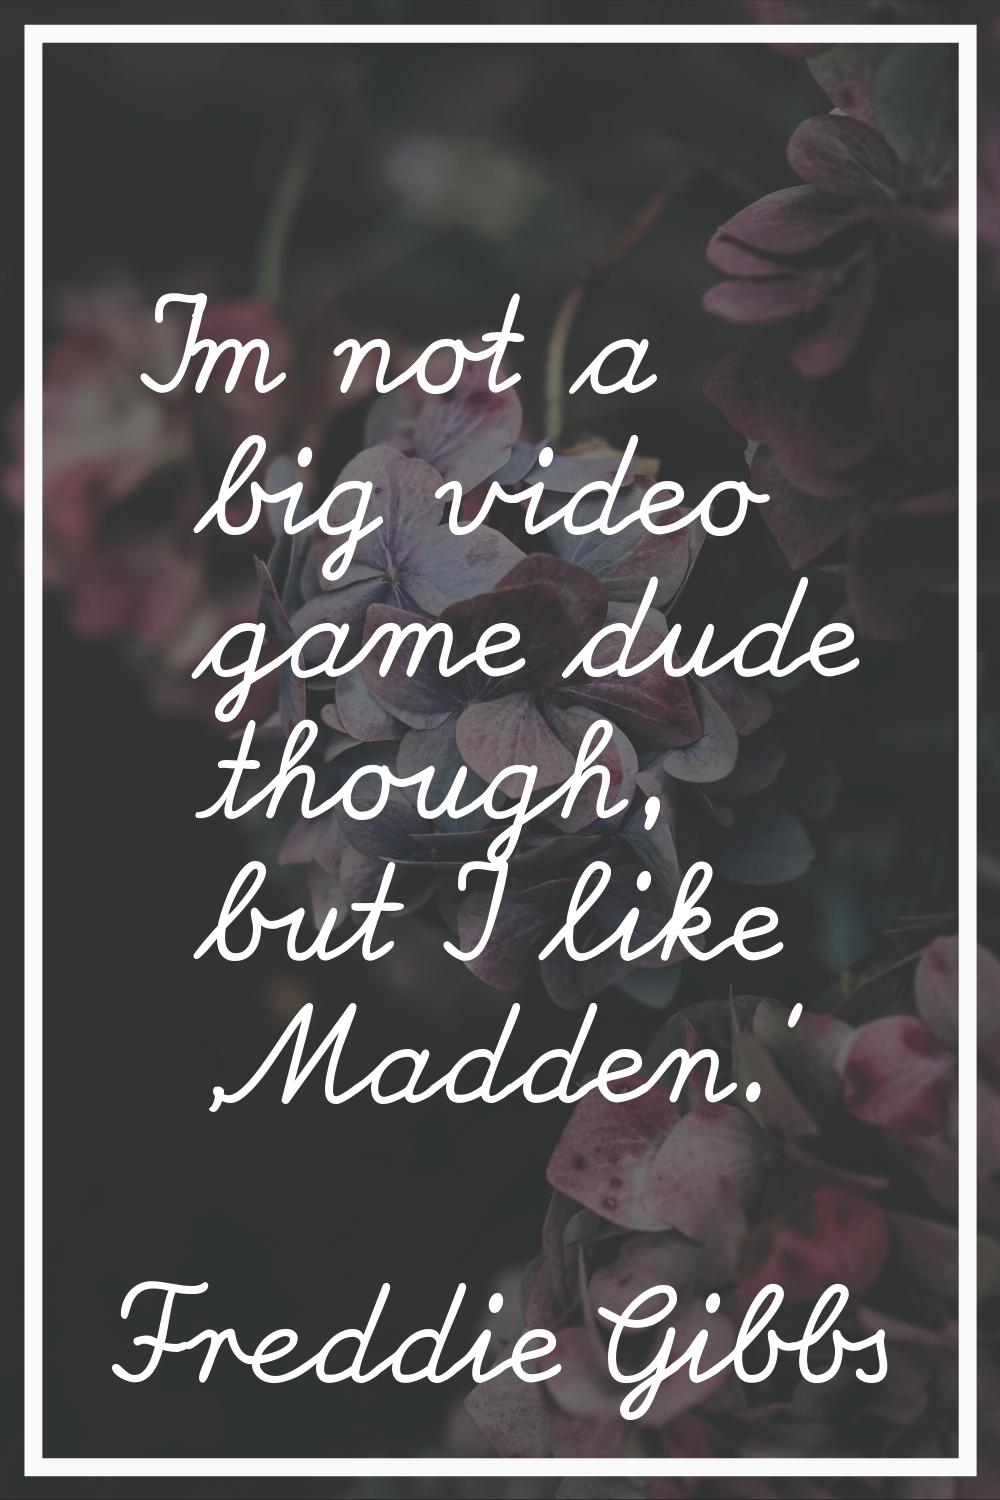 I'm not a big video game dude though, but I like 'Madden.'